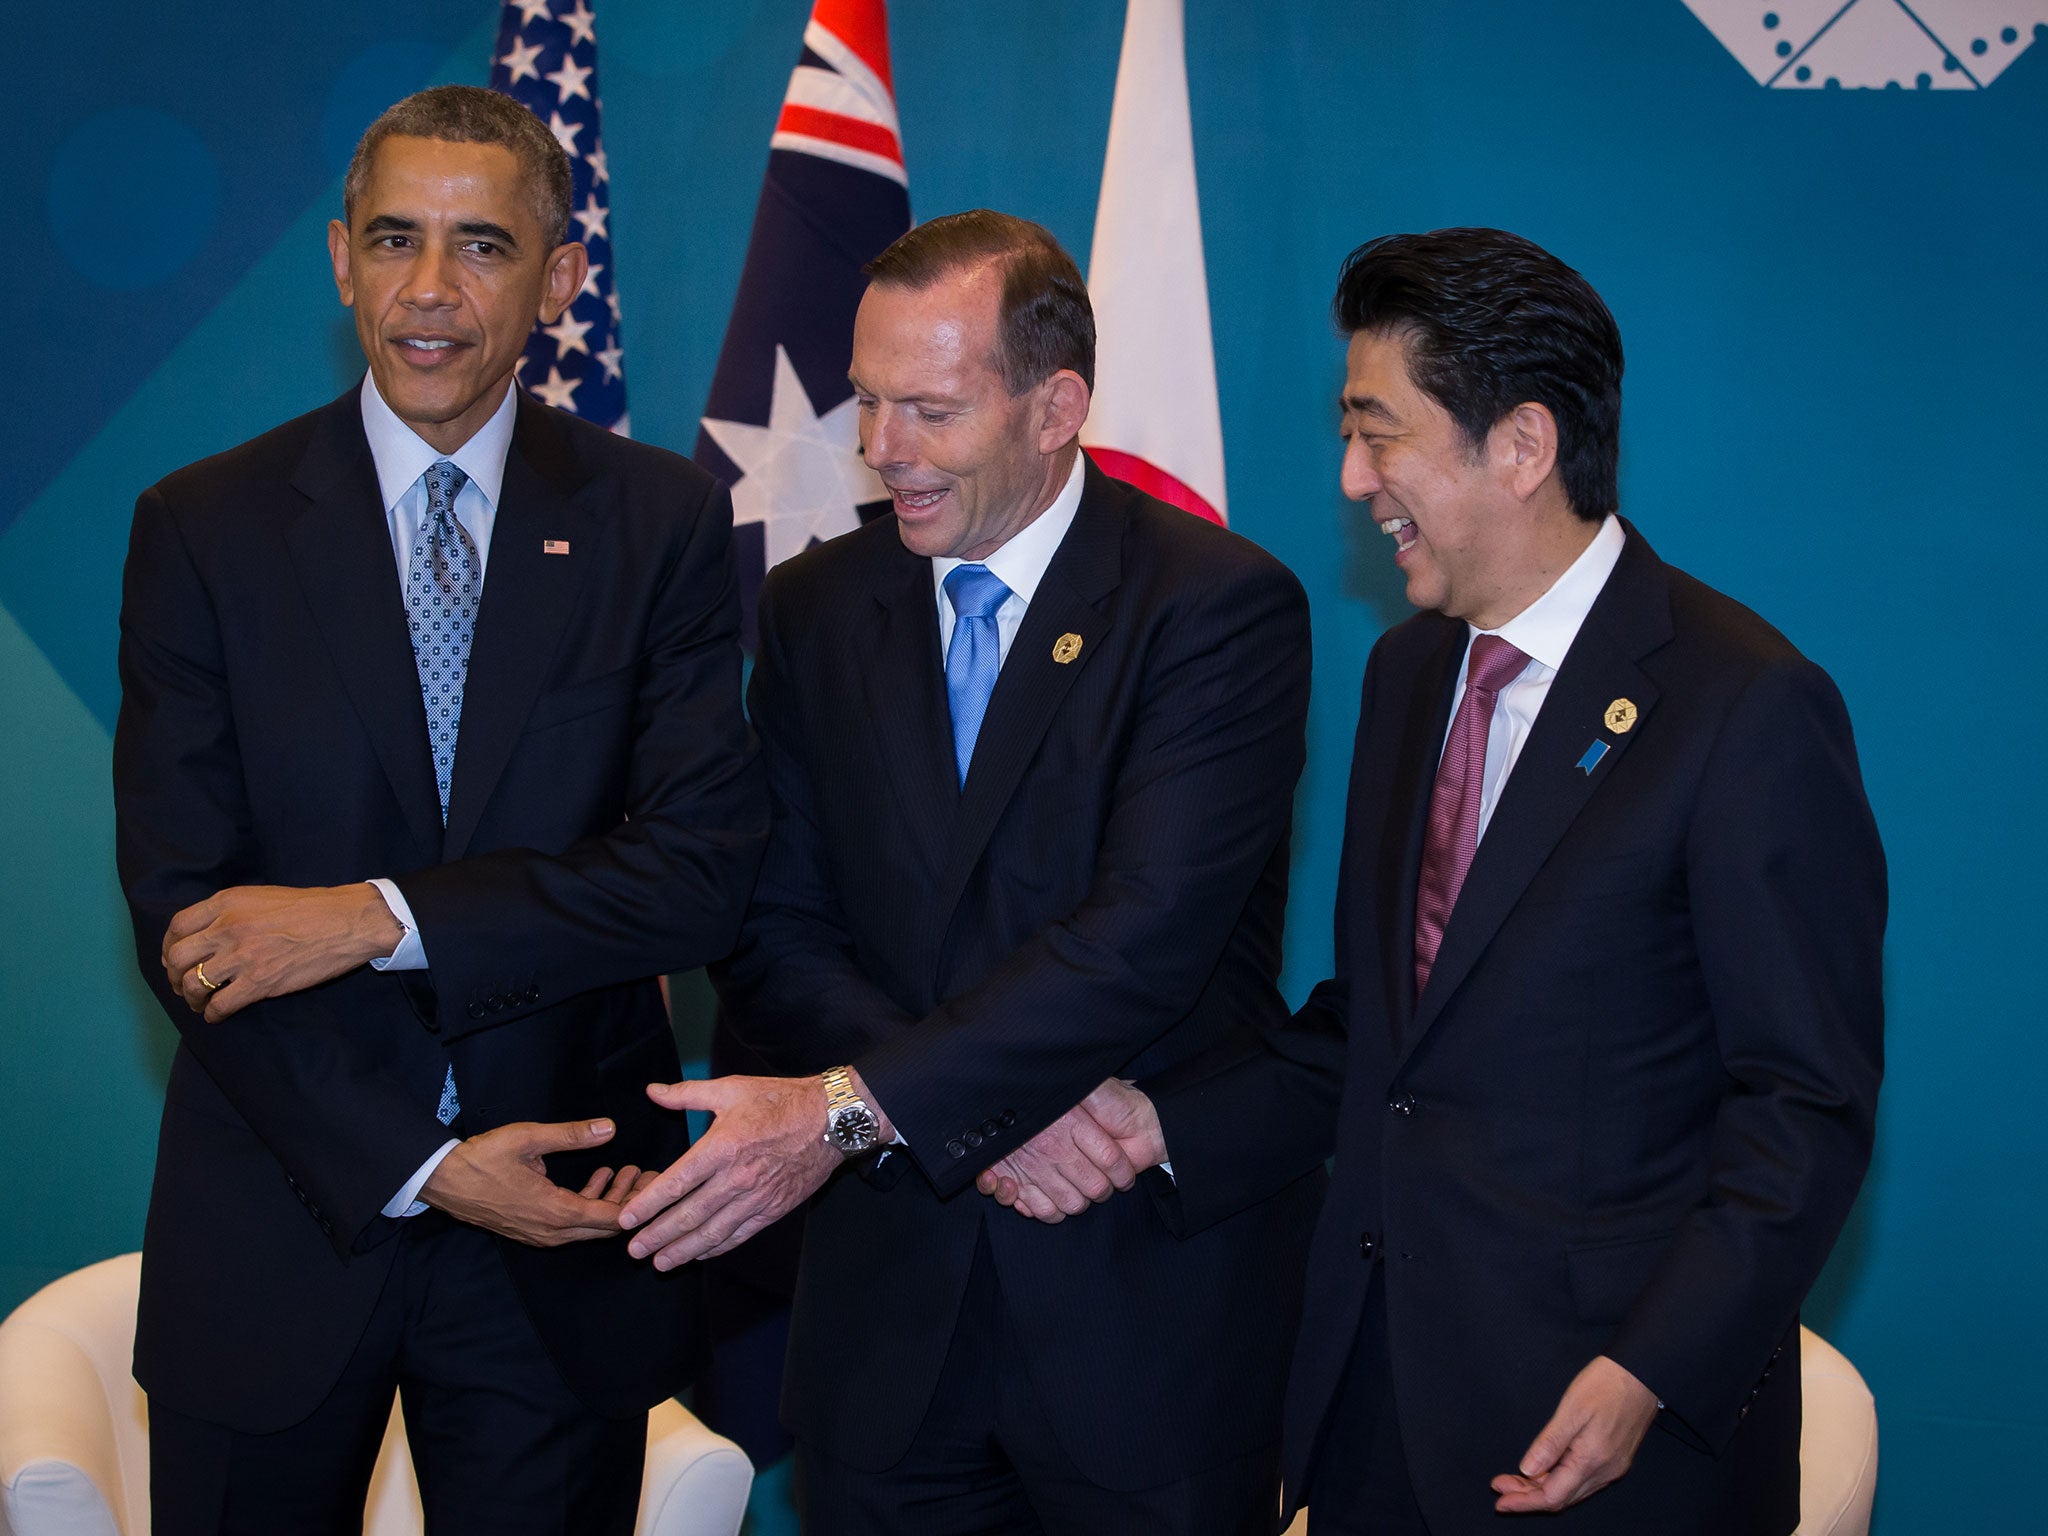 President Barack Obama, Australian Prime Minister Tony Abbott, and Japan's Prime Minister Shinzo Abe meet during a trilateral meeting at the G20 Summit